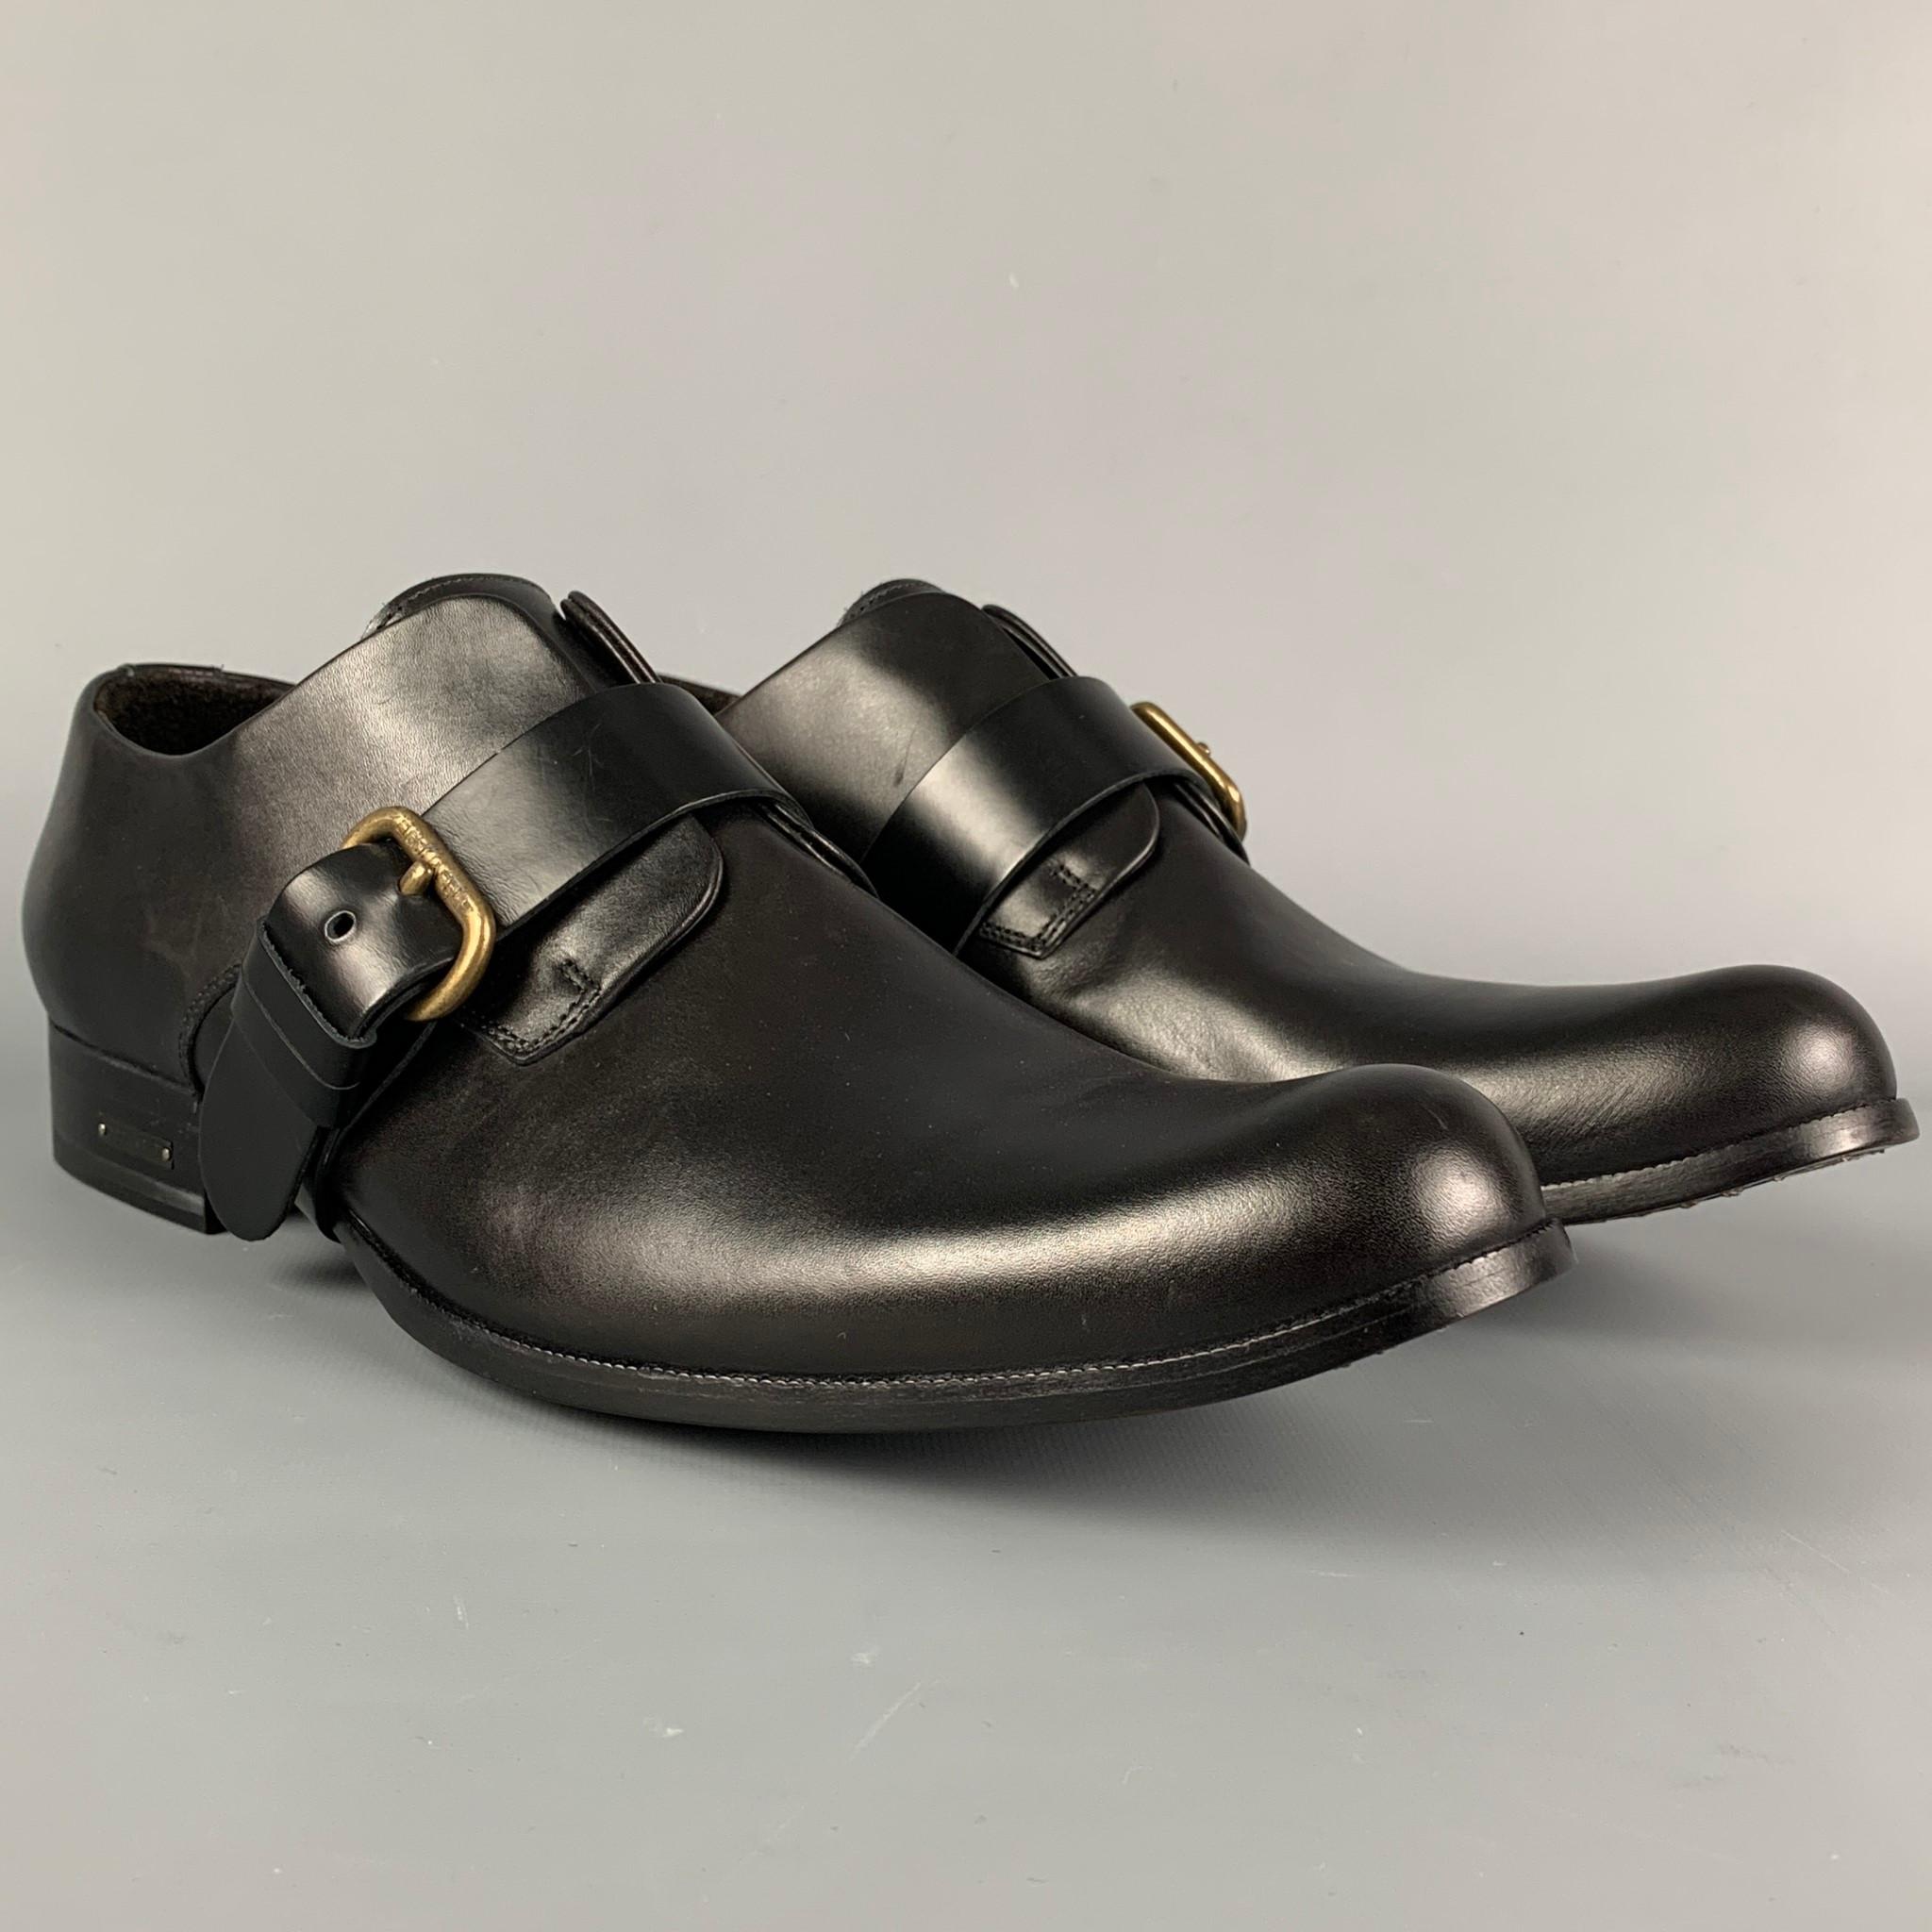 DSQUARED2 loafers comes in a black leather featuring a belted buckle strap and a leather sole. Made in Italy. Includes box. 

Excellent Pre-Owned Condition.
Marked: 44

Outsole: 12.5 in. x 4 in. 